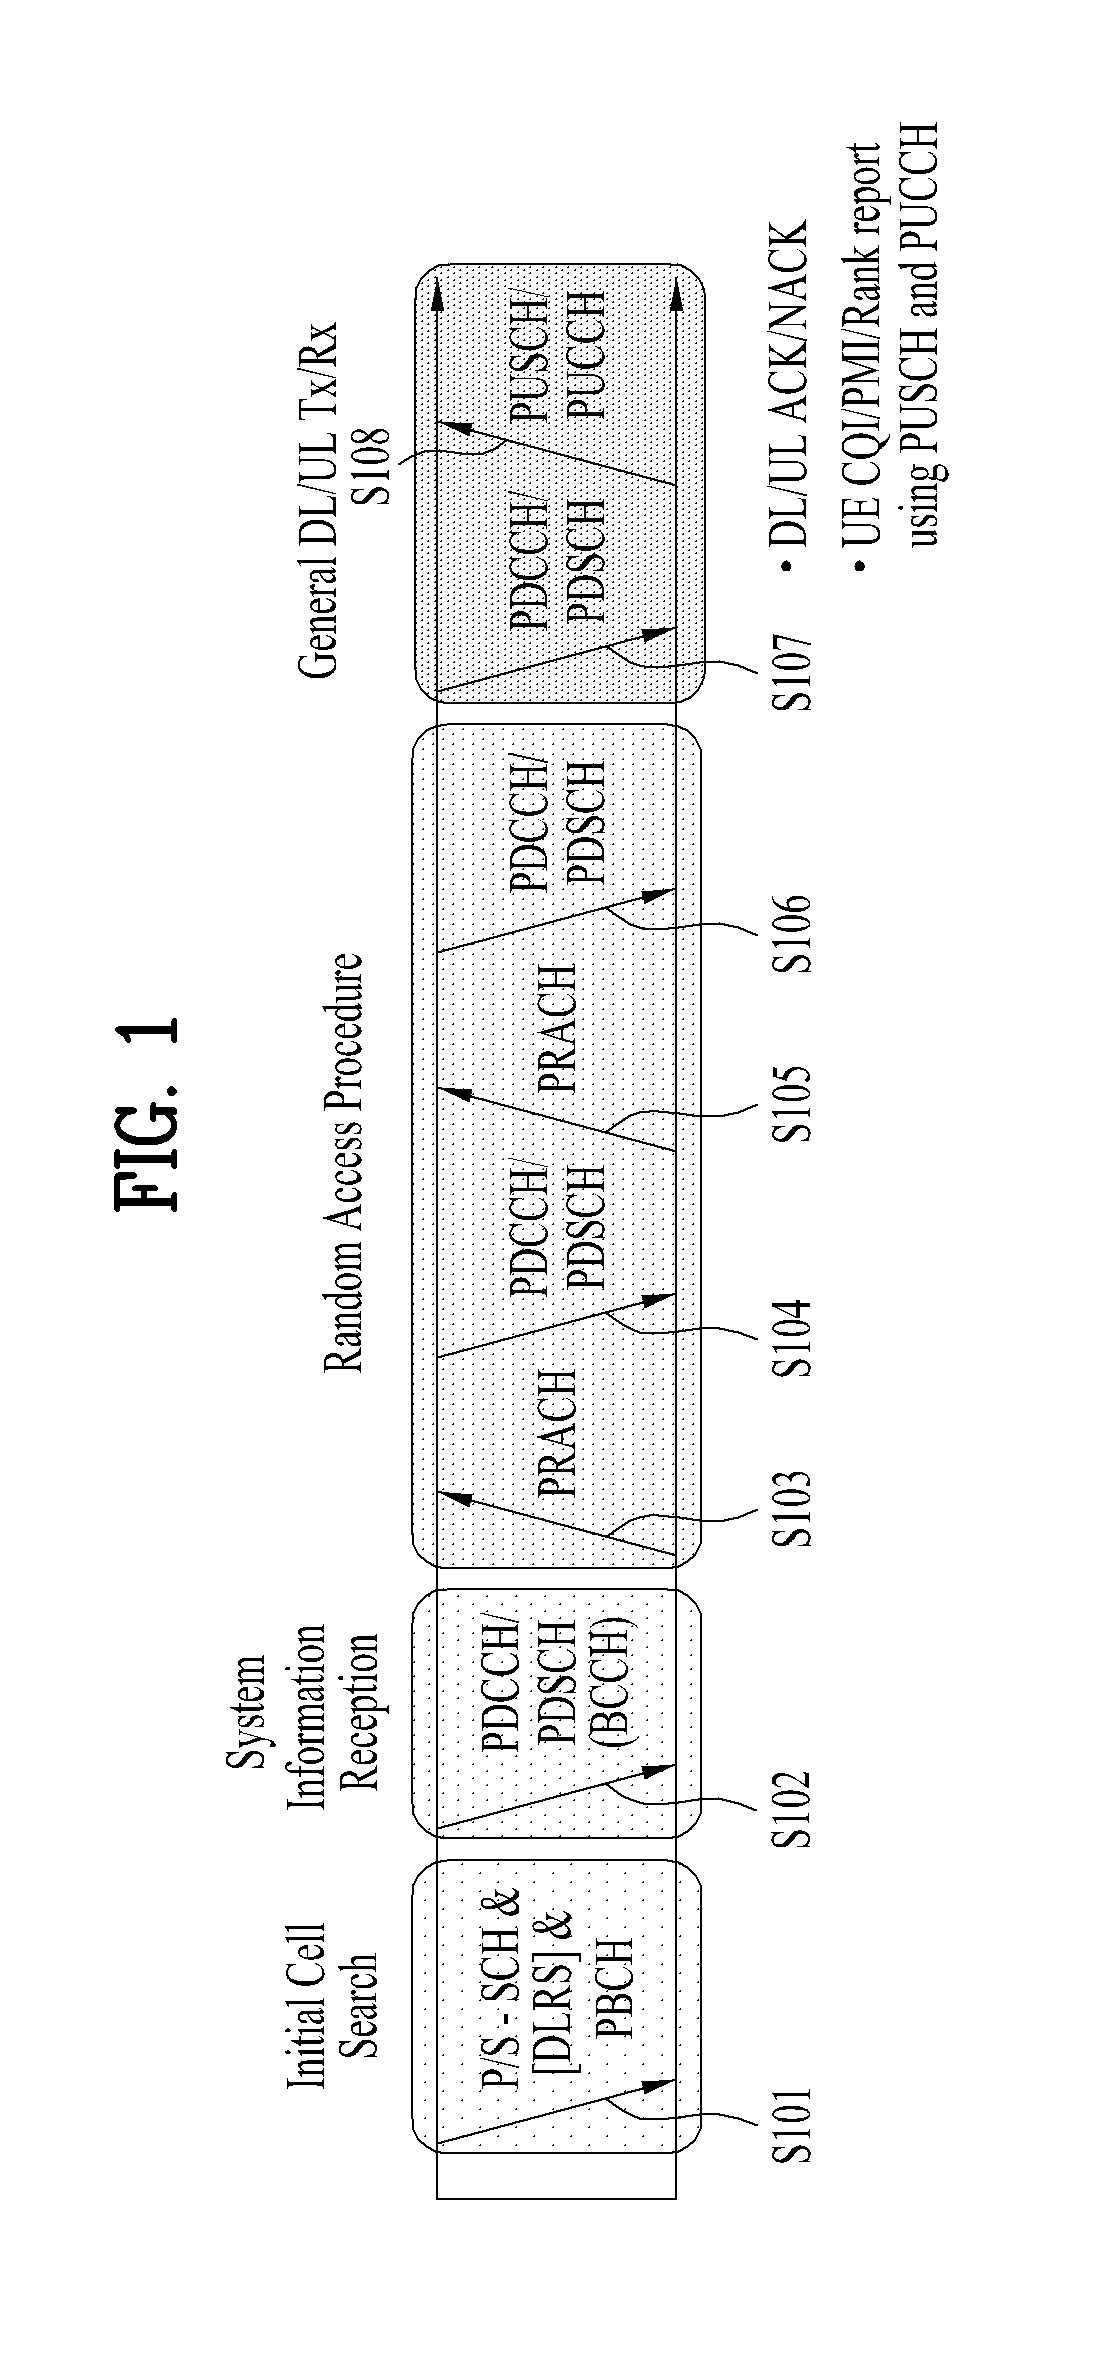 Signal transmission/reception method and apparatus therefor